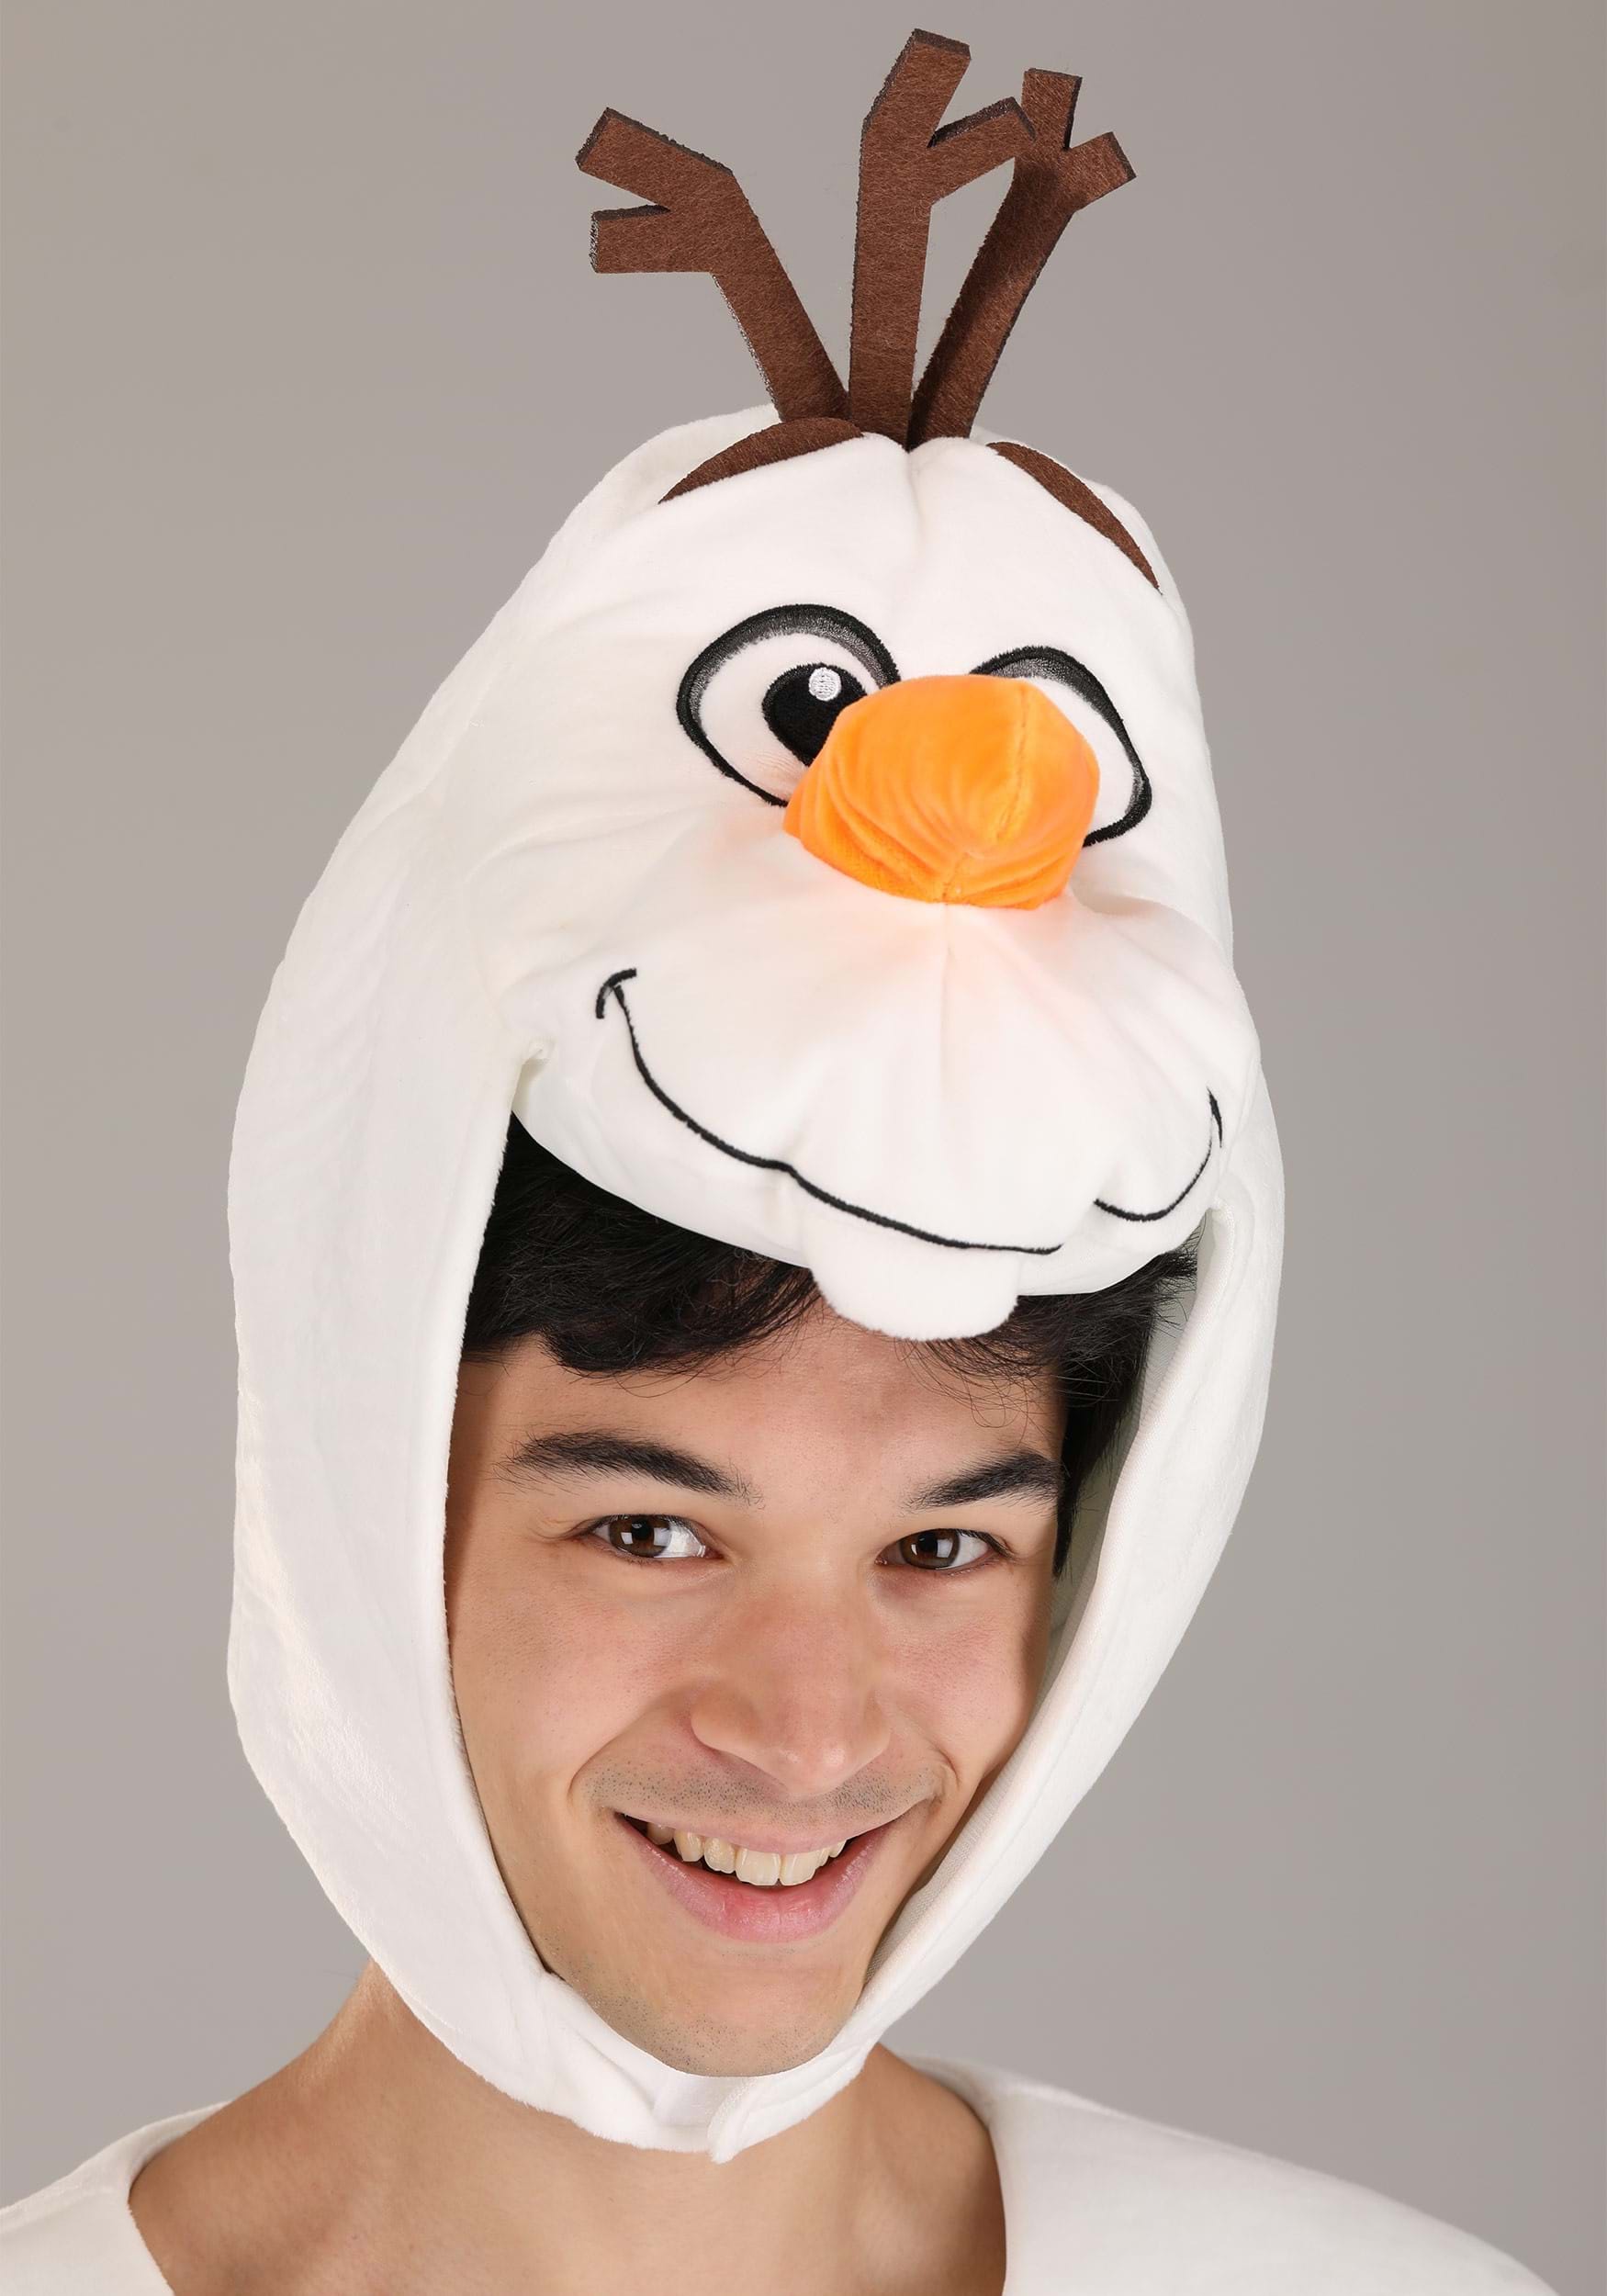 Frozen Olaf Adult Costume